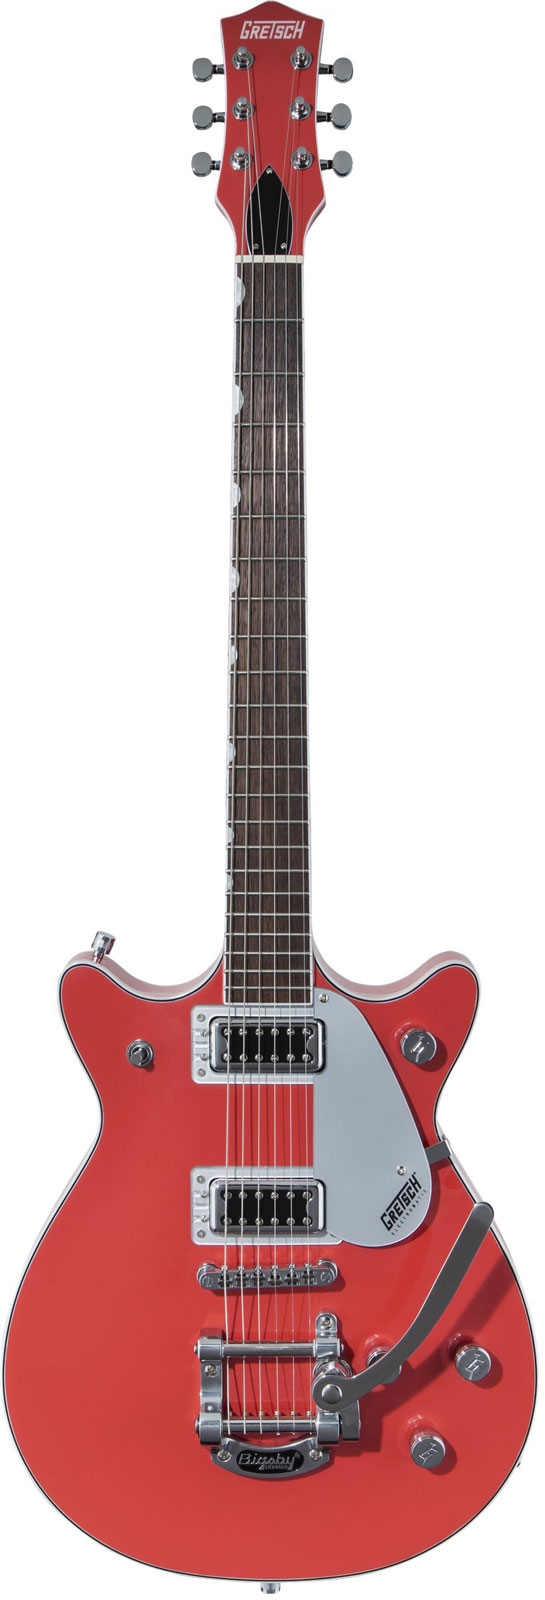 G5232T ELECTROMATIC DOUBLE JET FT WITH BIGSBY LRL, TAHITI RED